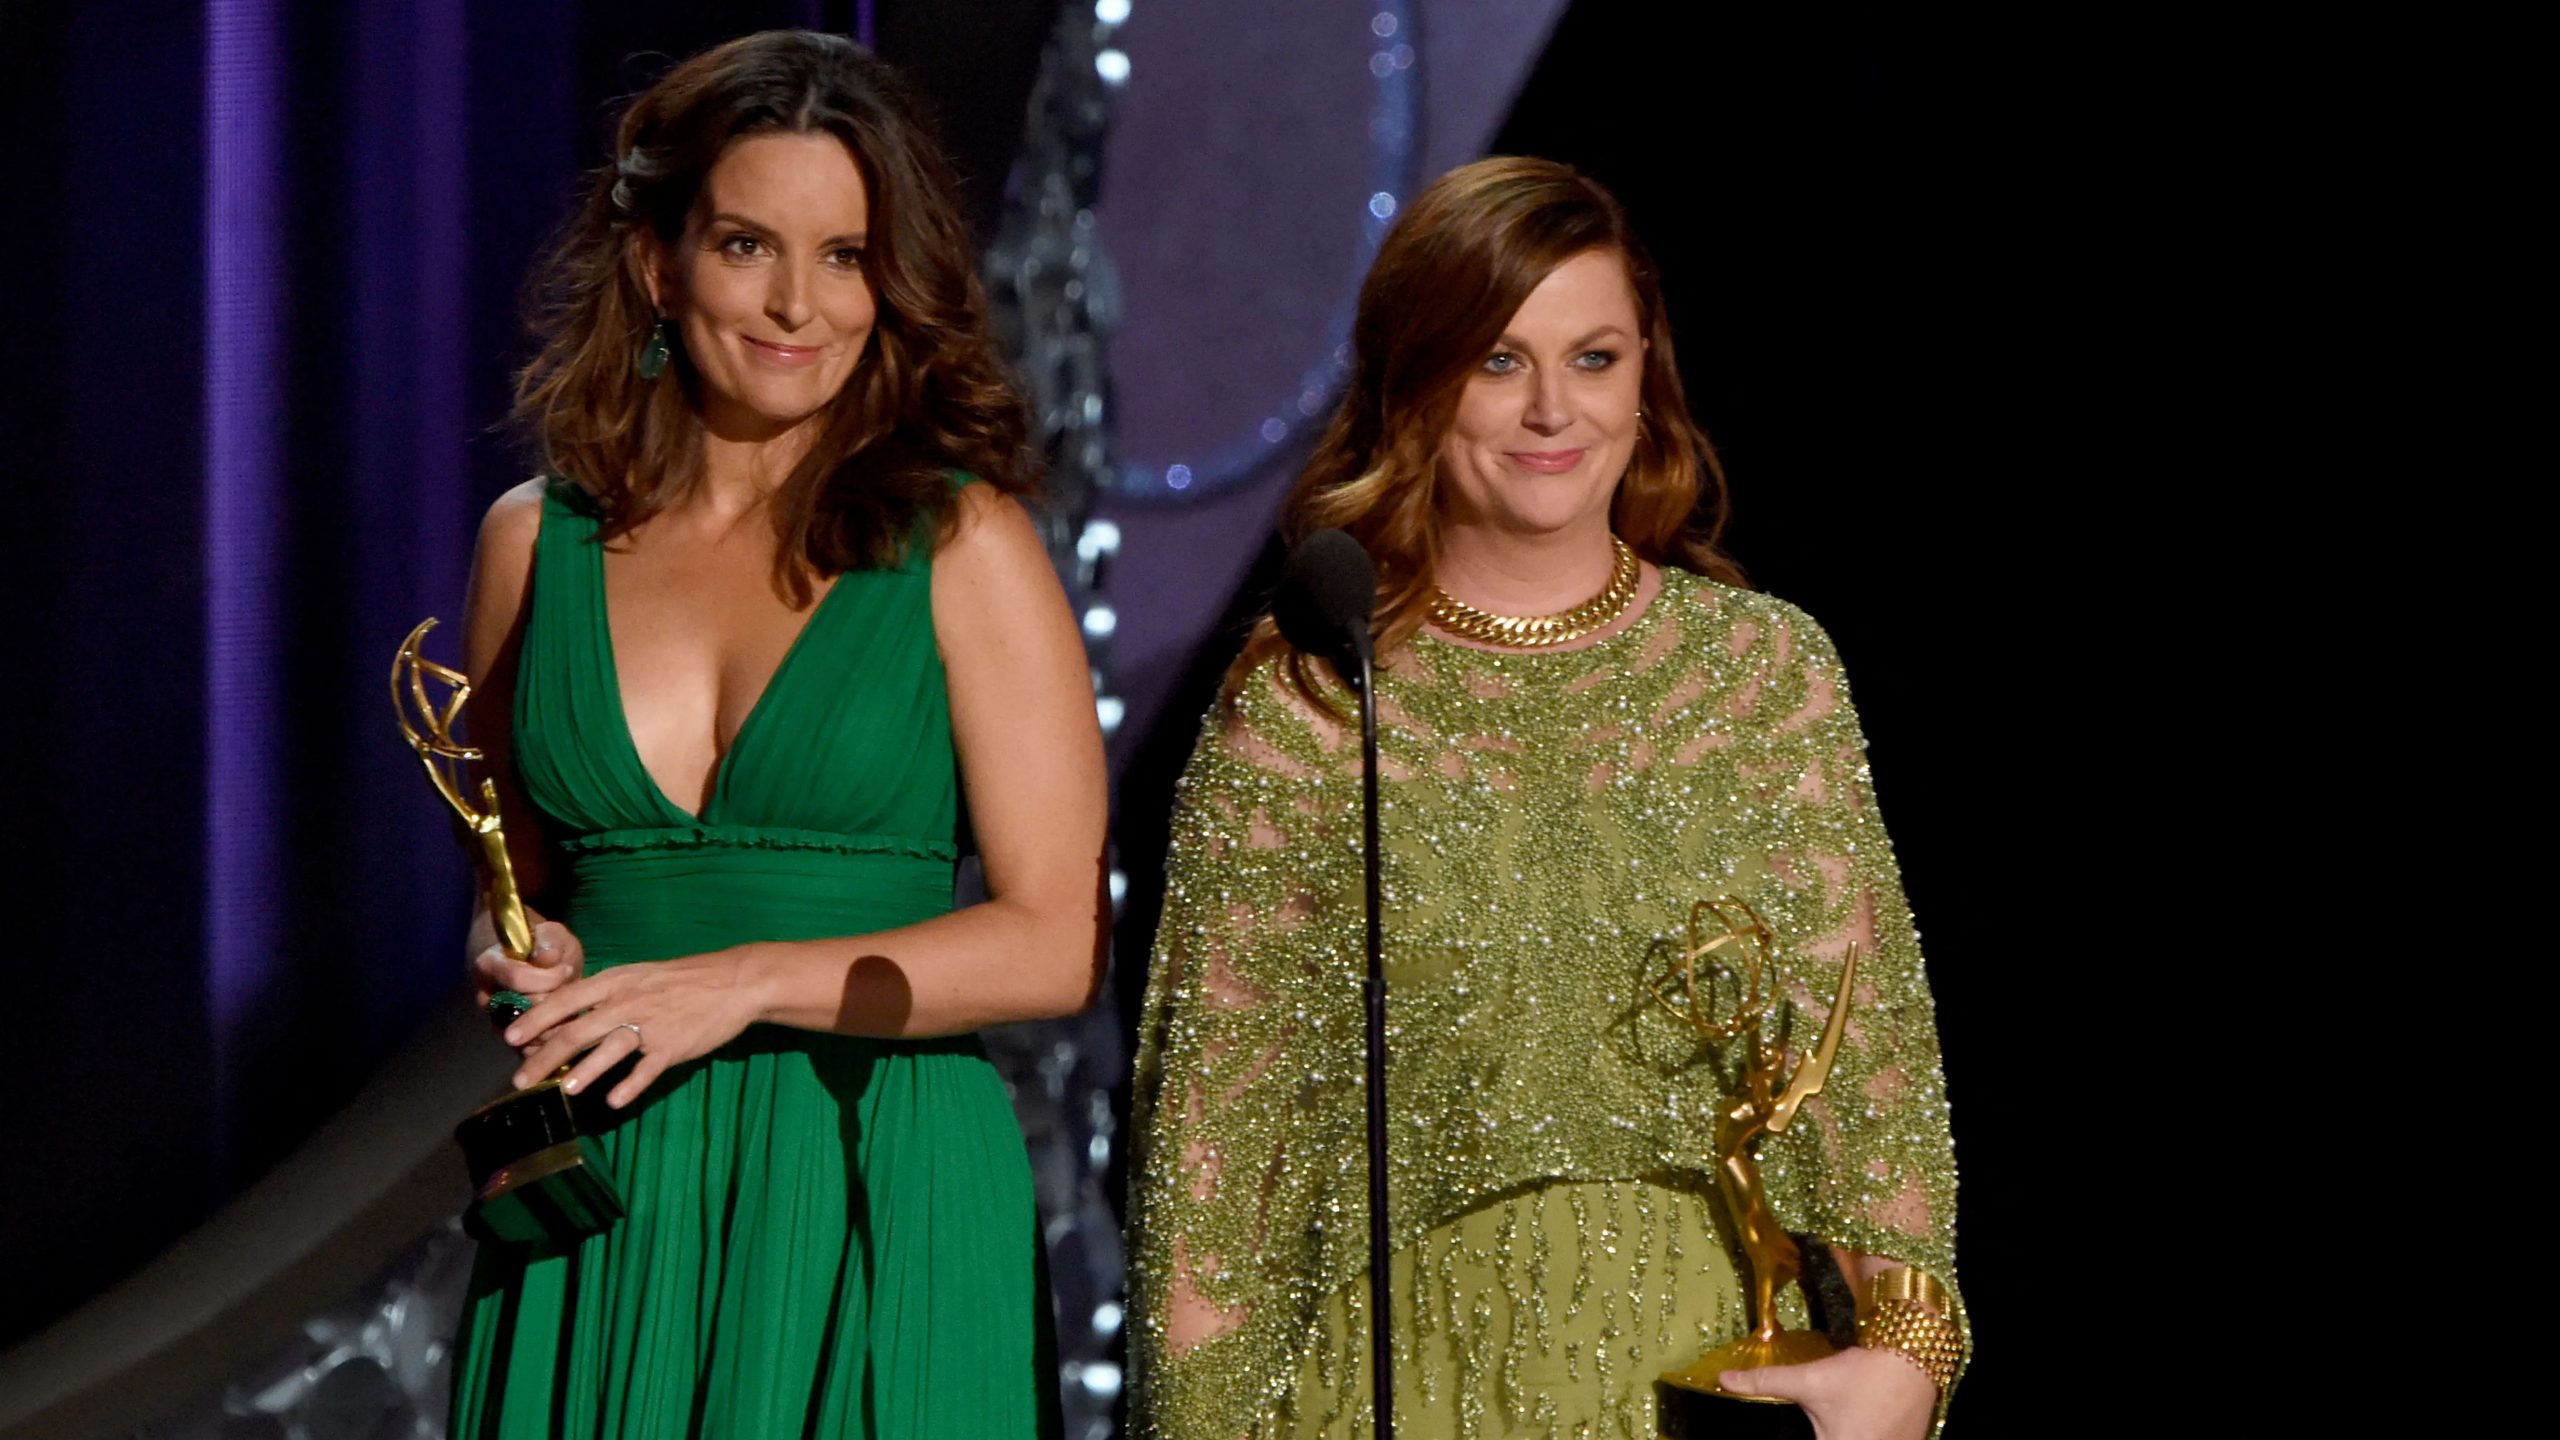 Quirky duo of Tina Fey, Amy Poehler returns to host Golden Globes 21